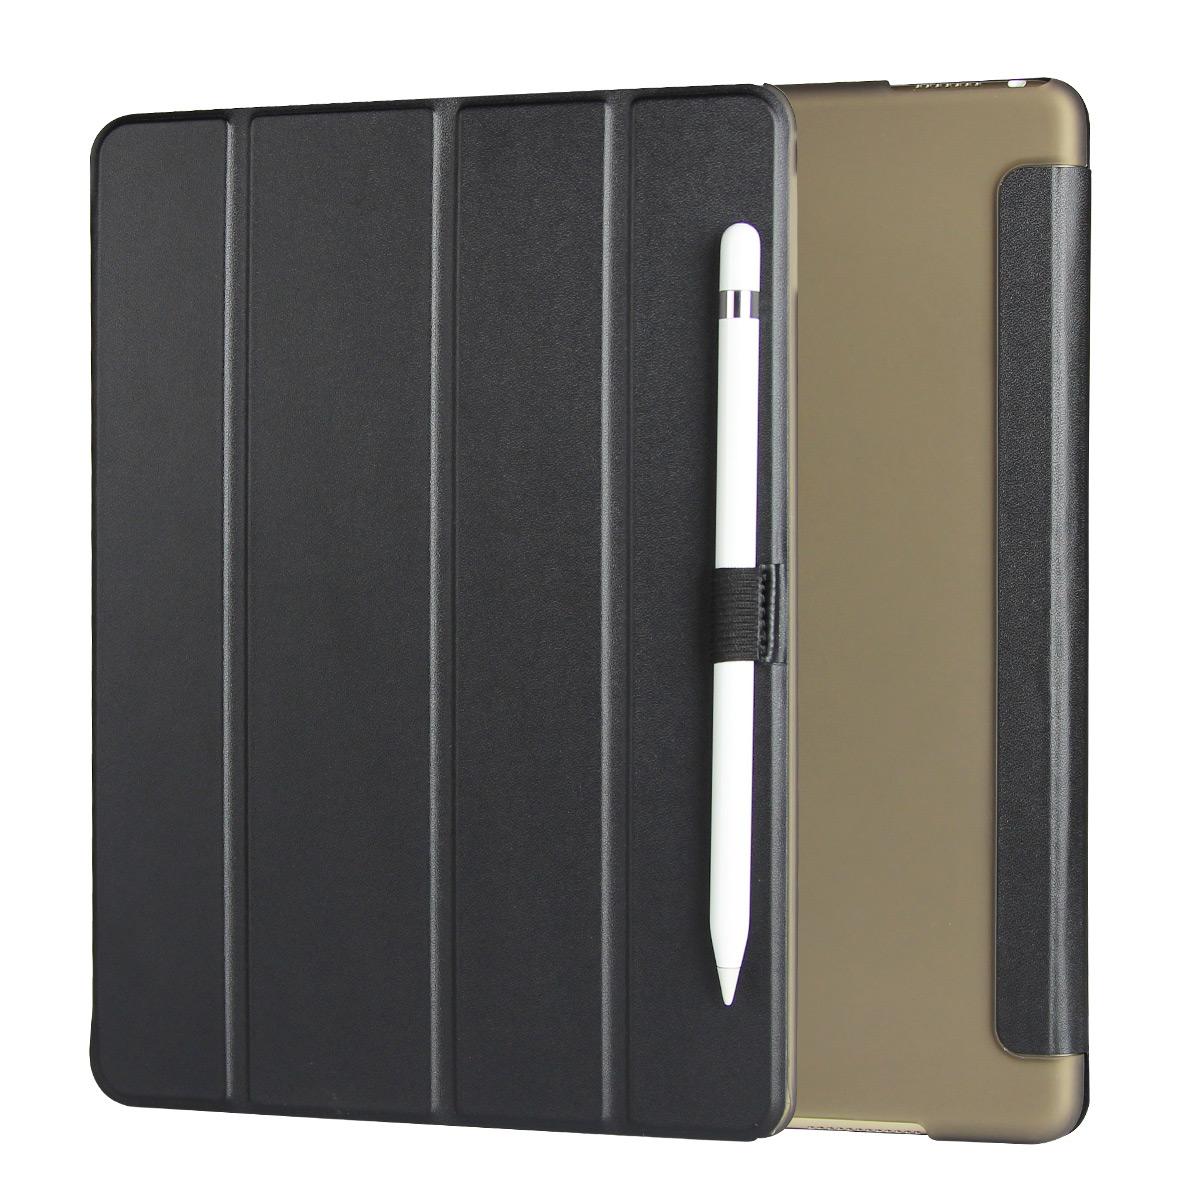 Ultra slim leather case for iPad Pro 9.7 with pen holder